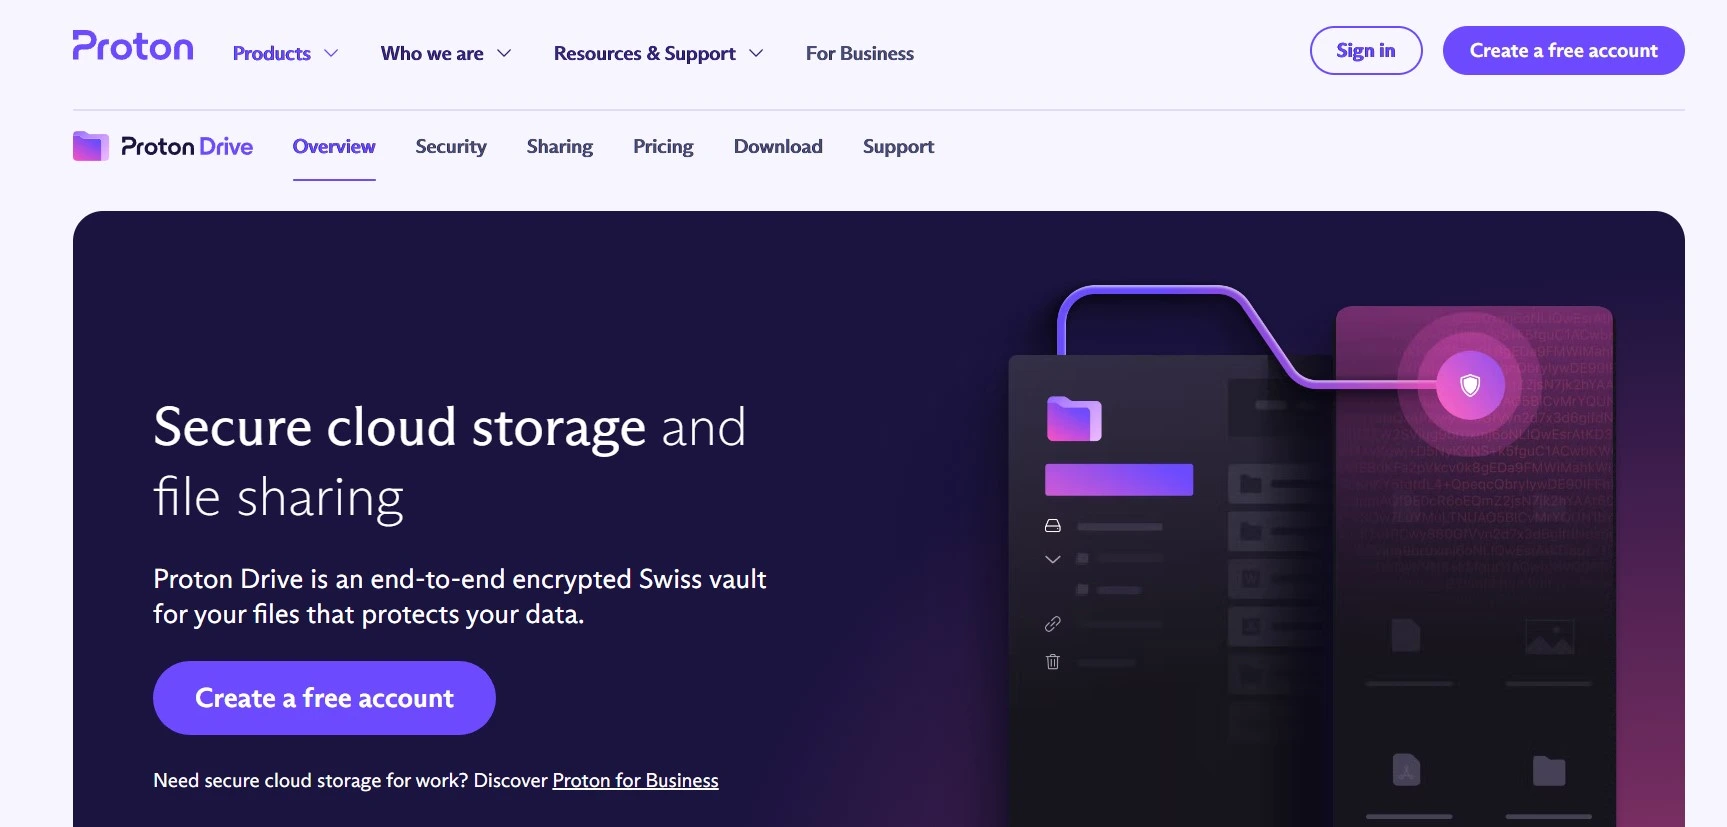 Proton drive encrypted cloud storage and file sharing platform